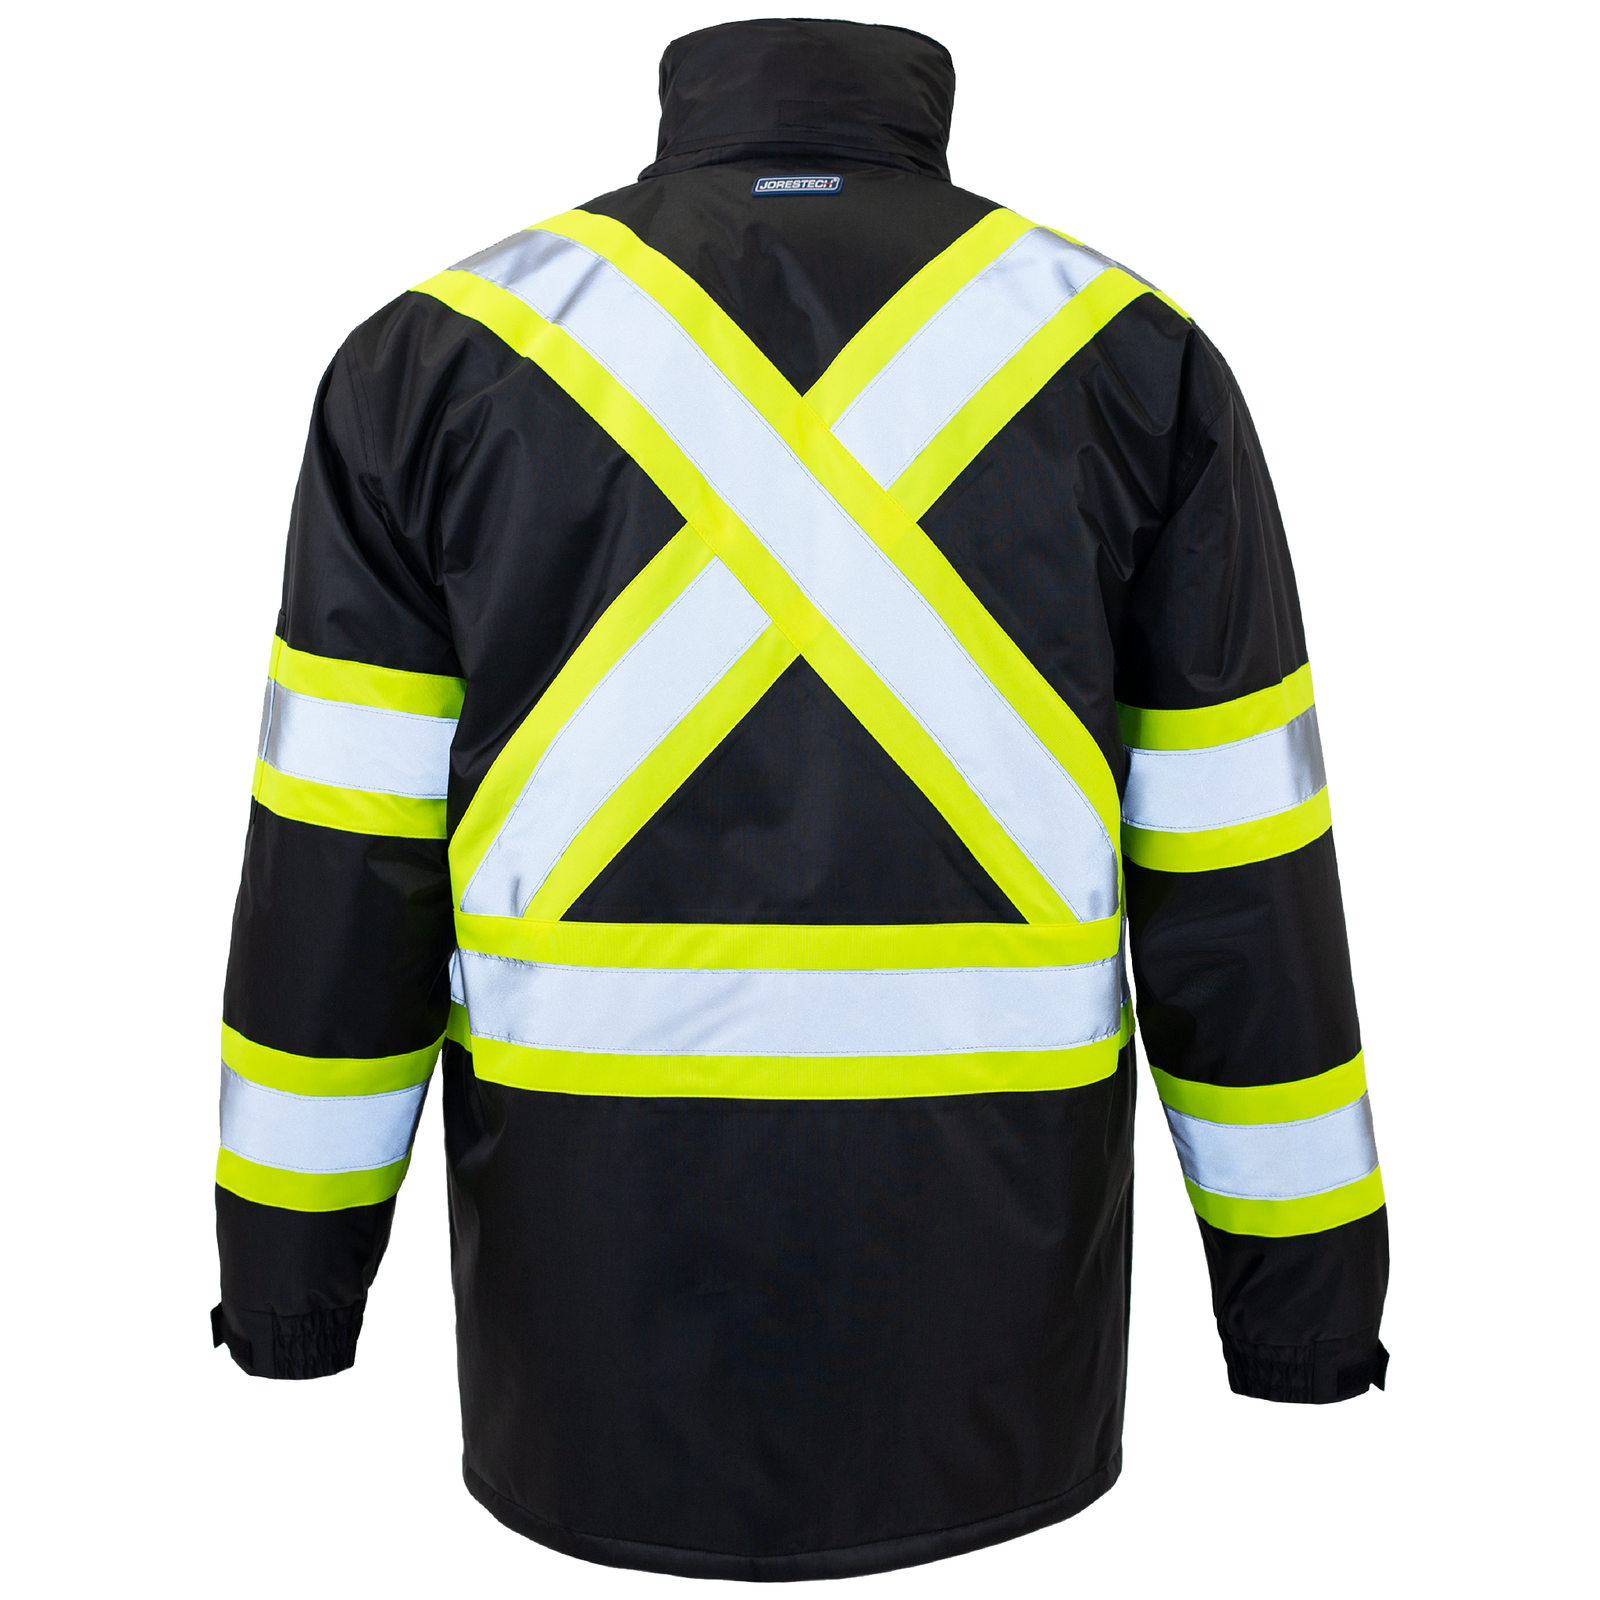 ANSI and CSA compliant high vis safety jacket with X on back reflective stripes and hoodie 